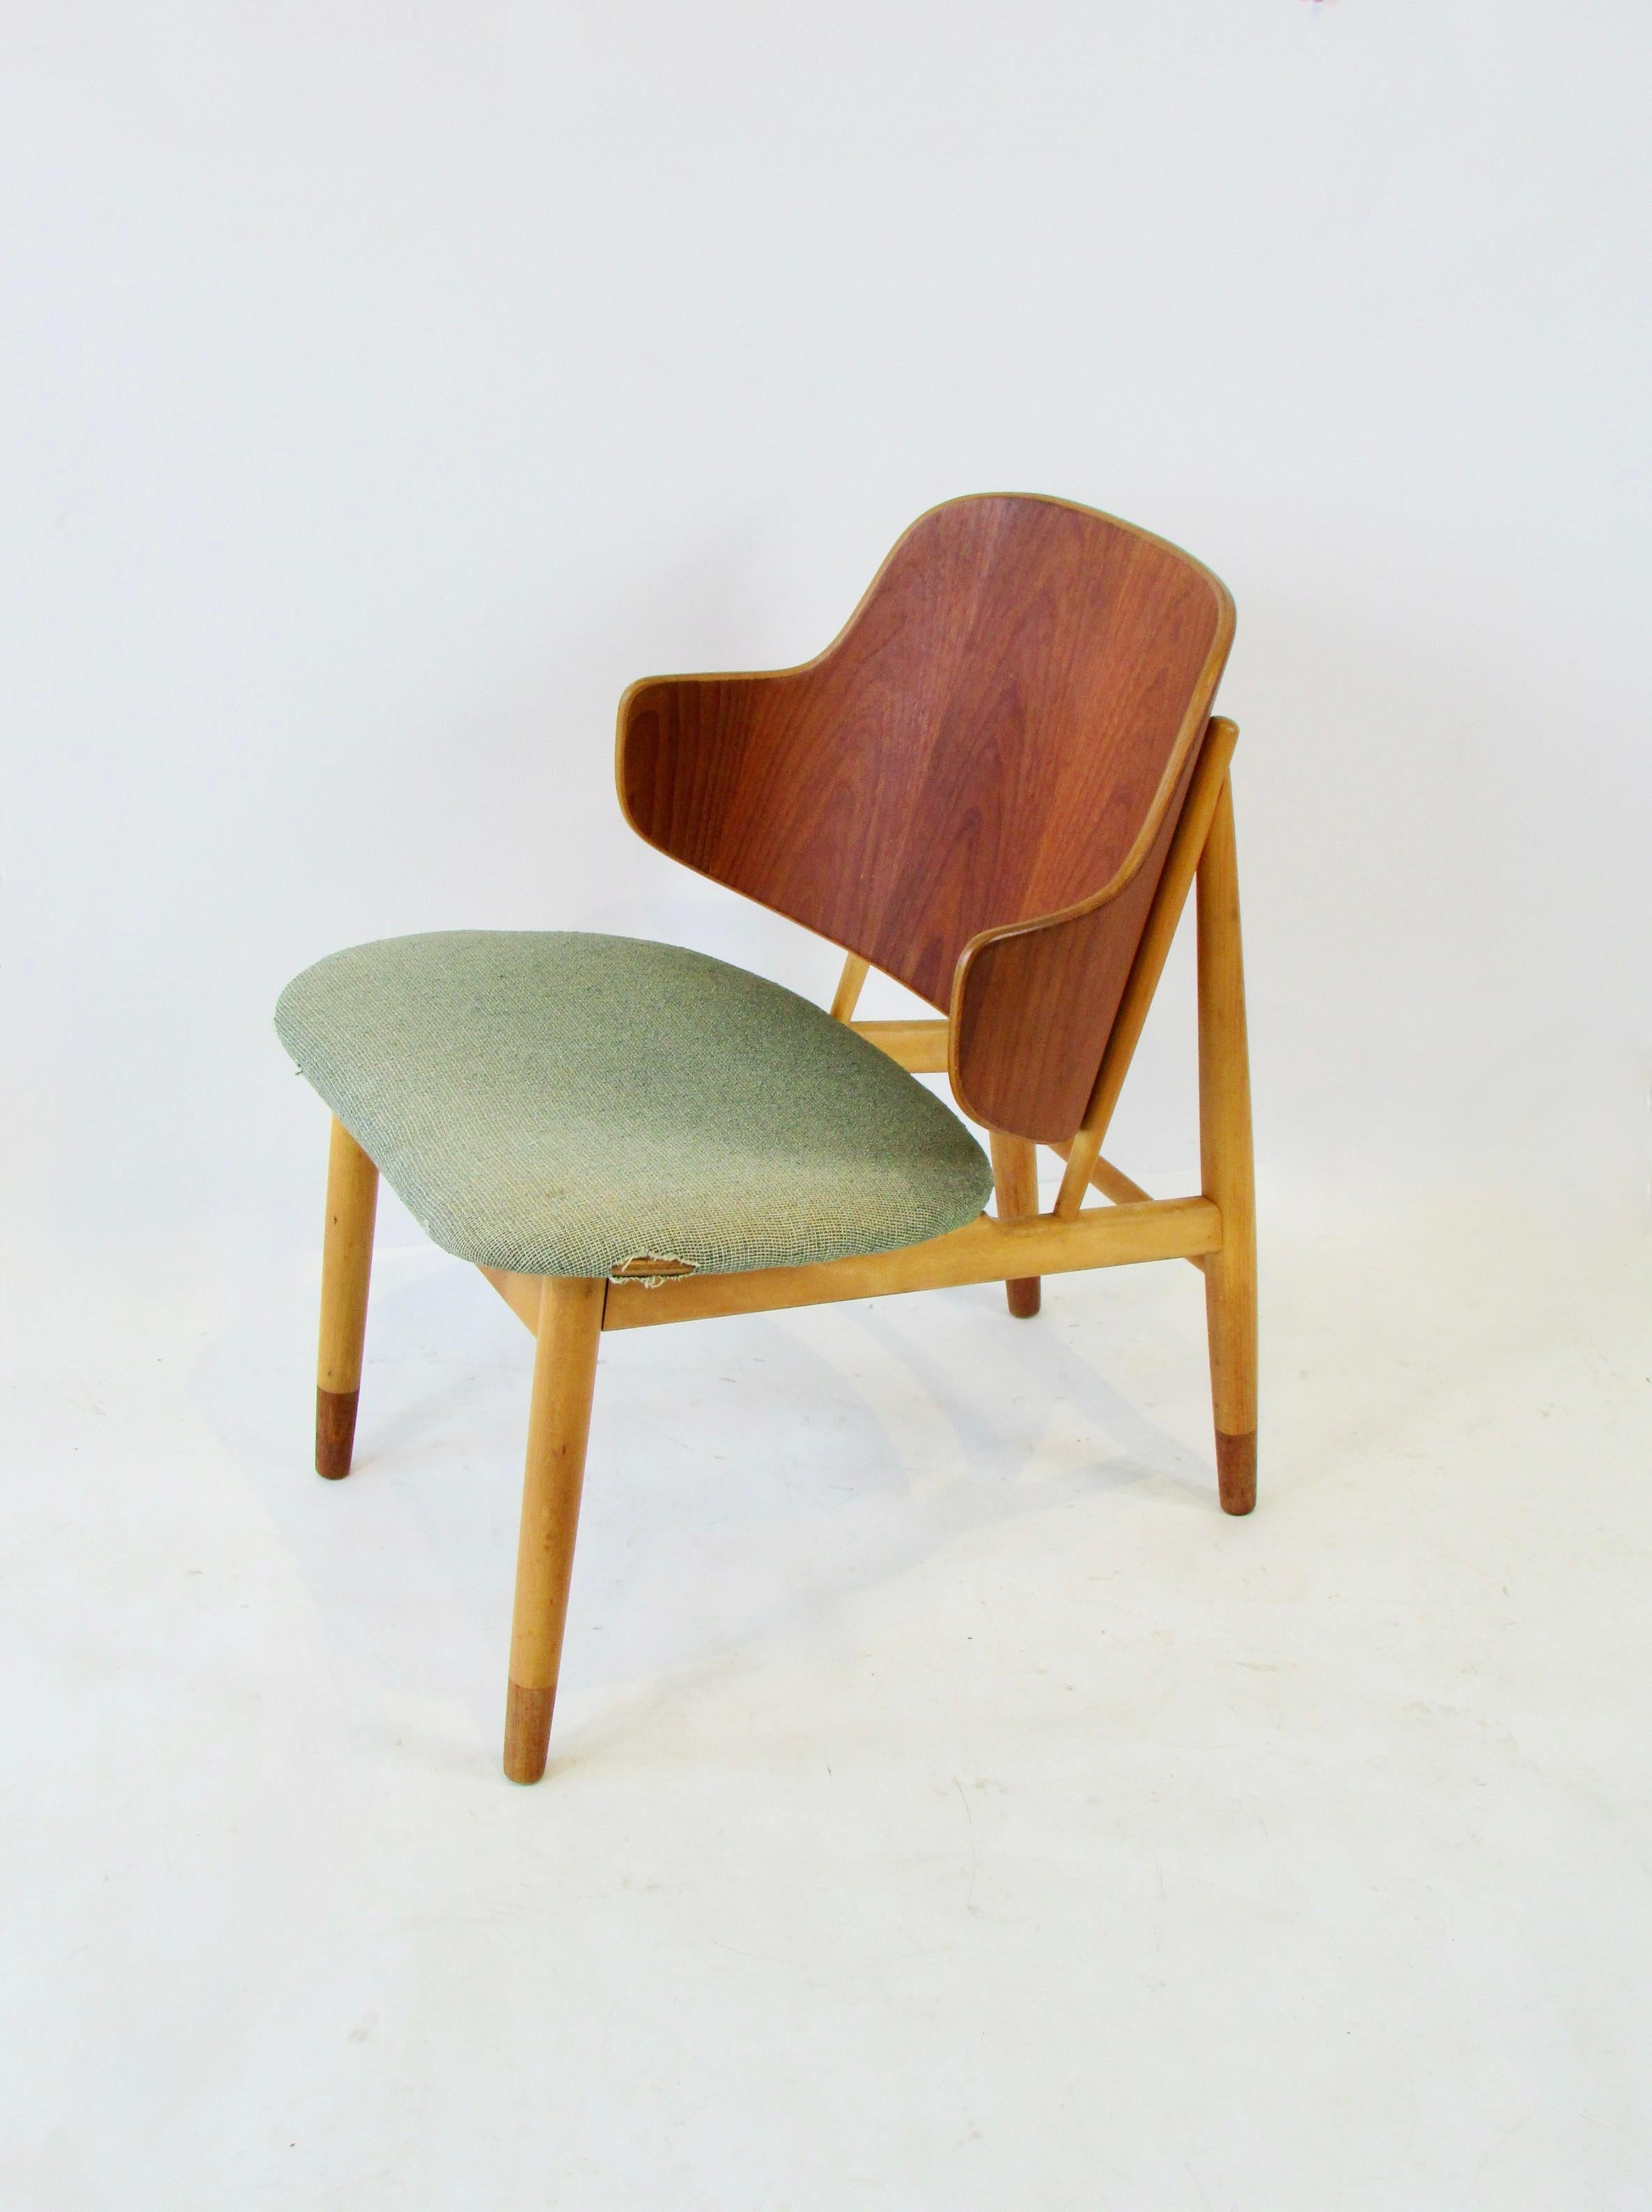 
Ib Kofod-Larsen design Chair produced by Christiansen & Larsen . Designed in the early 1950s by Kofod Larsen and manufactured by Christensen & Larsen A/S in Denmark. A classic  clean and  refined example of the Danish Modern design. Natural teak